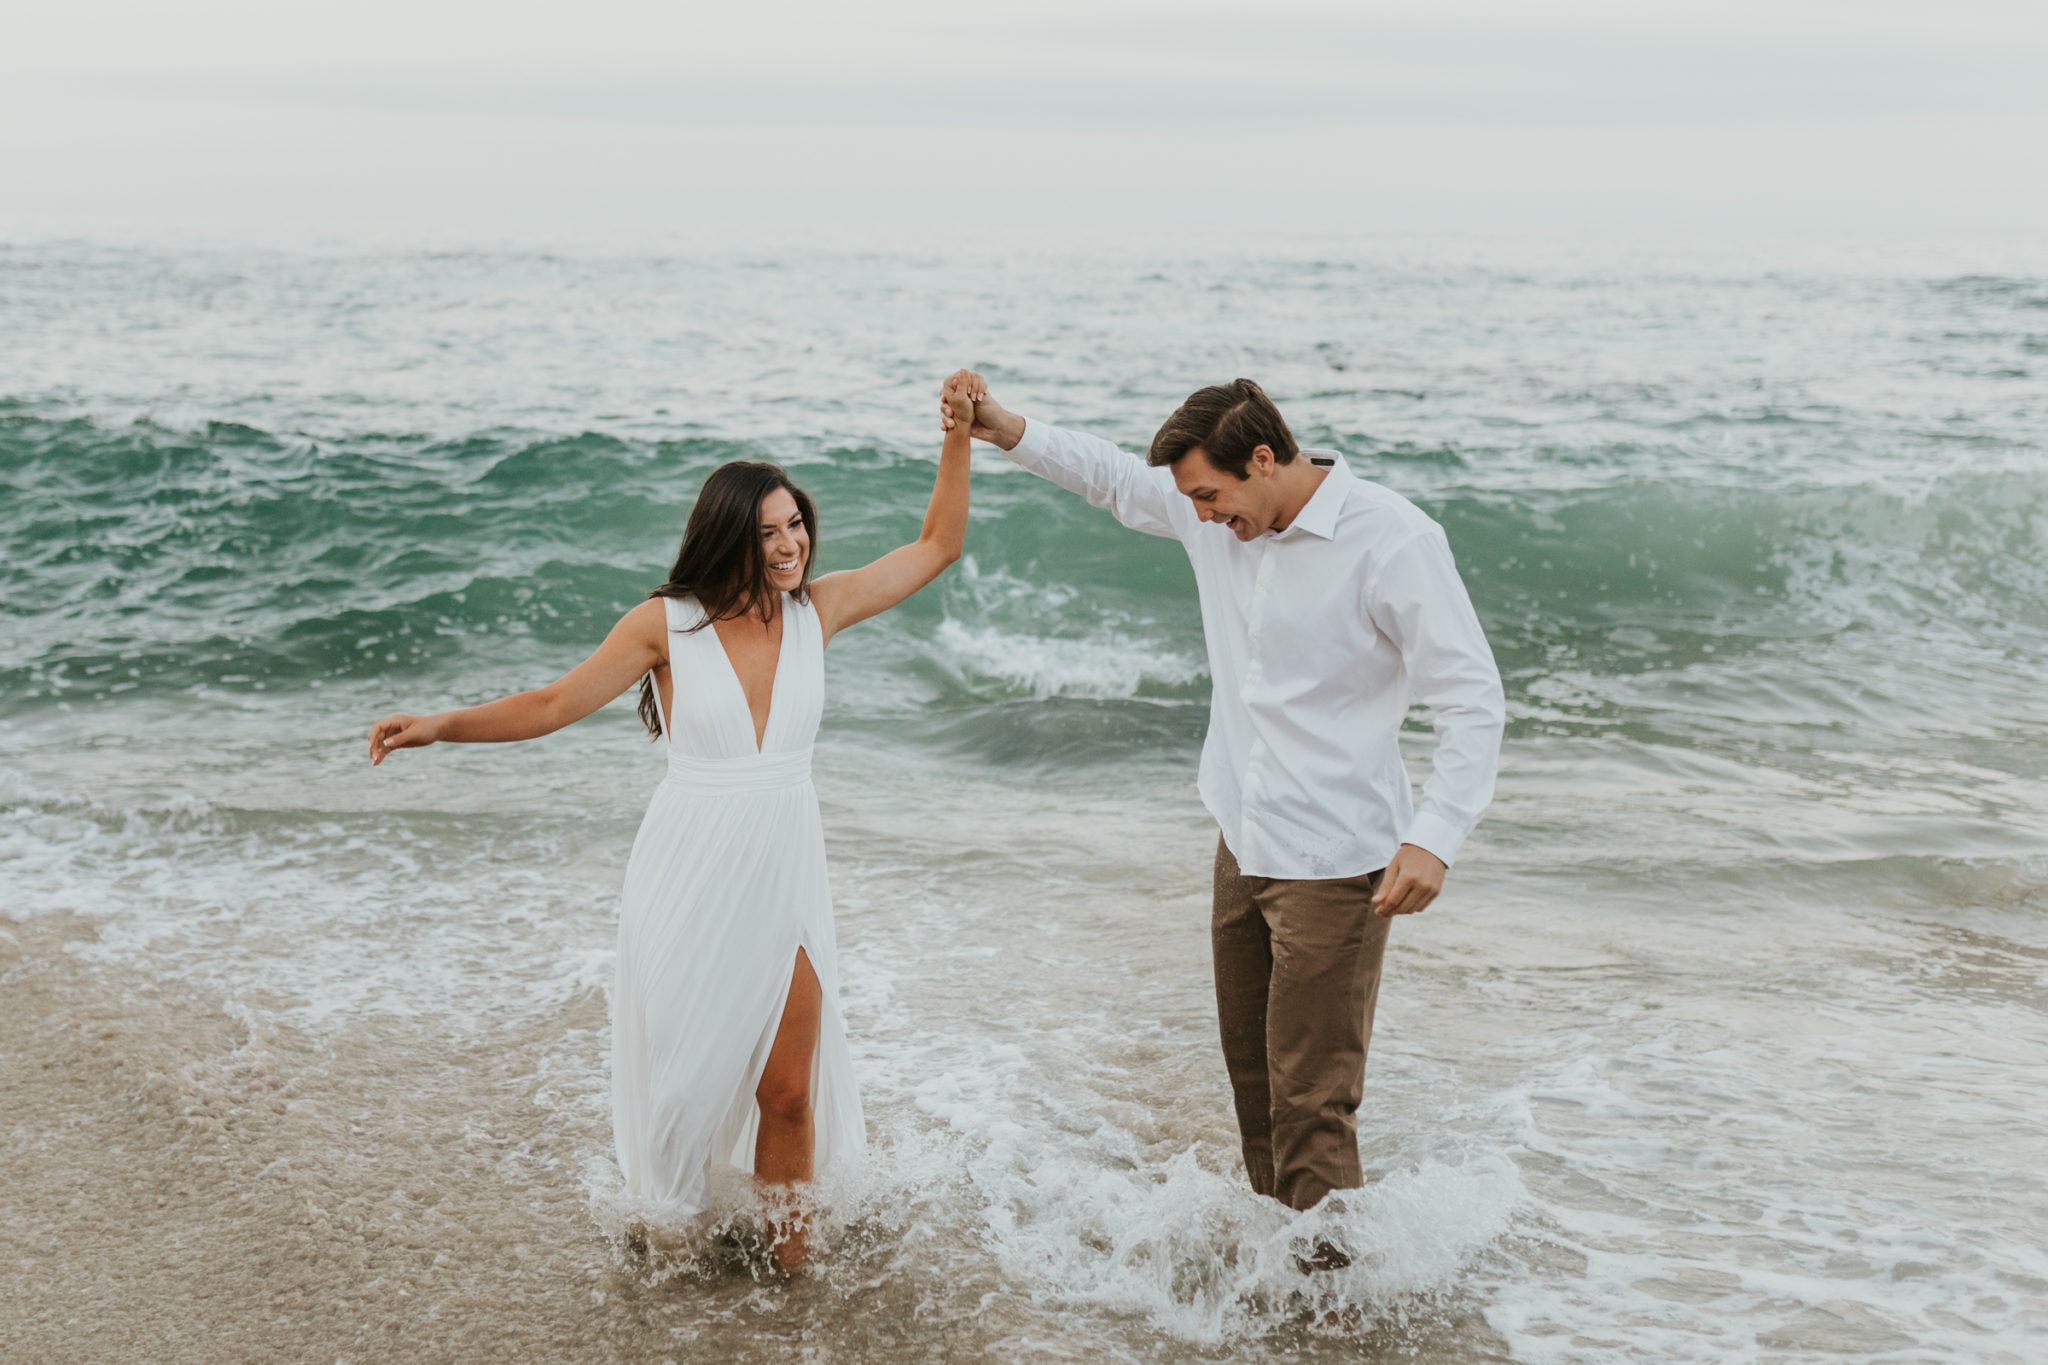 A bride and groom playing in the water on their elopement day.